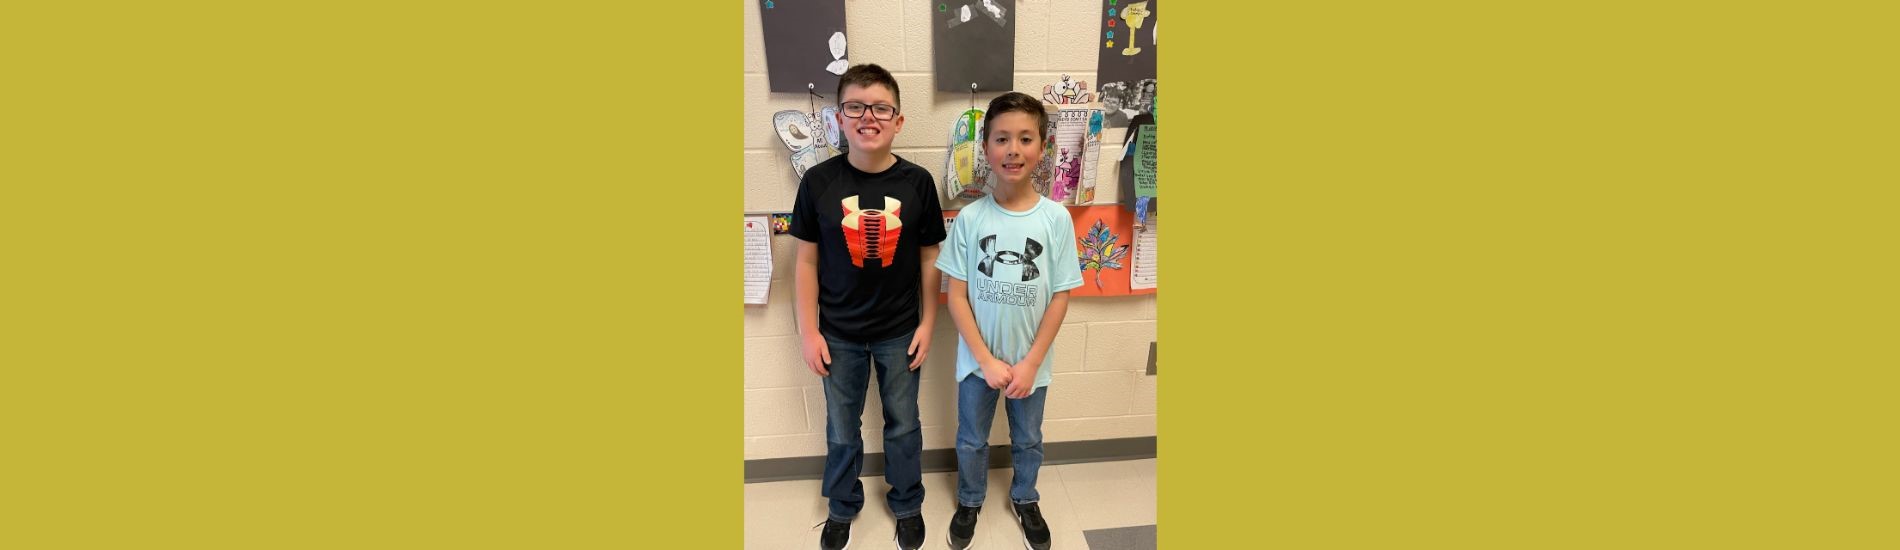 2 fourth grade boys who will be competing in the Math 24 tournament